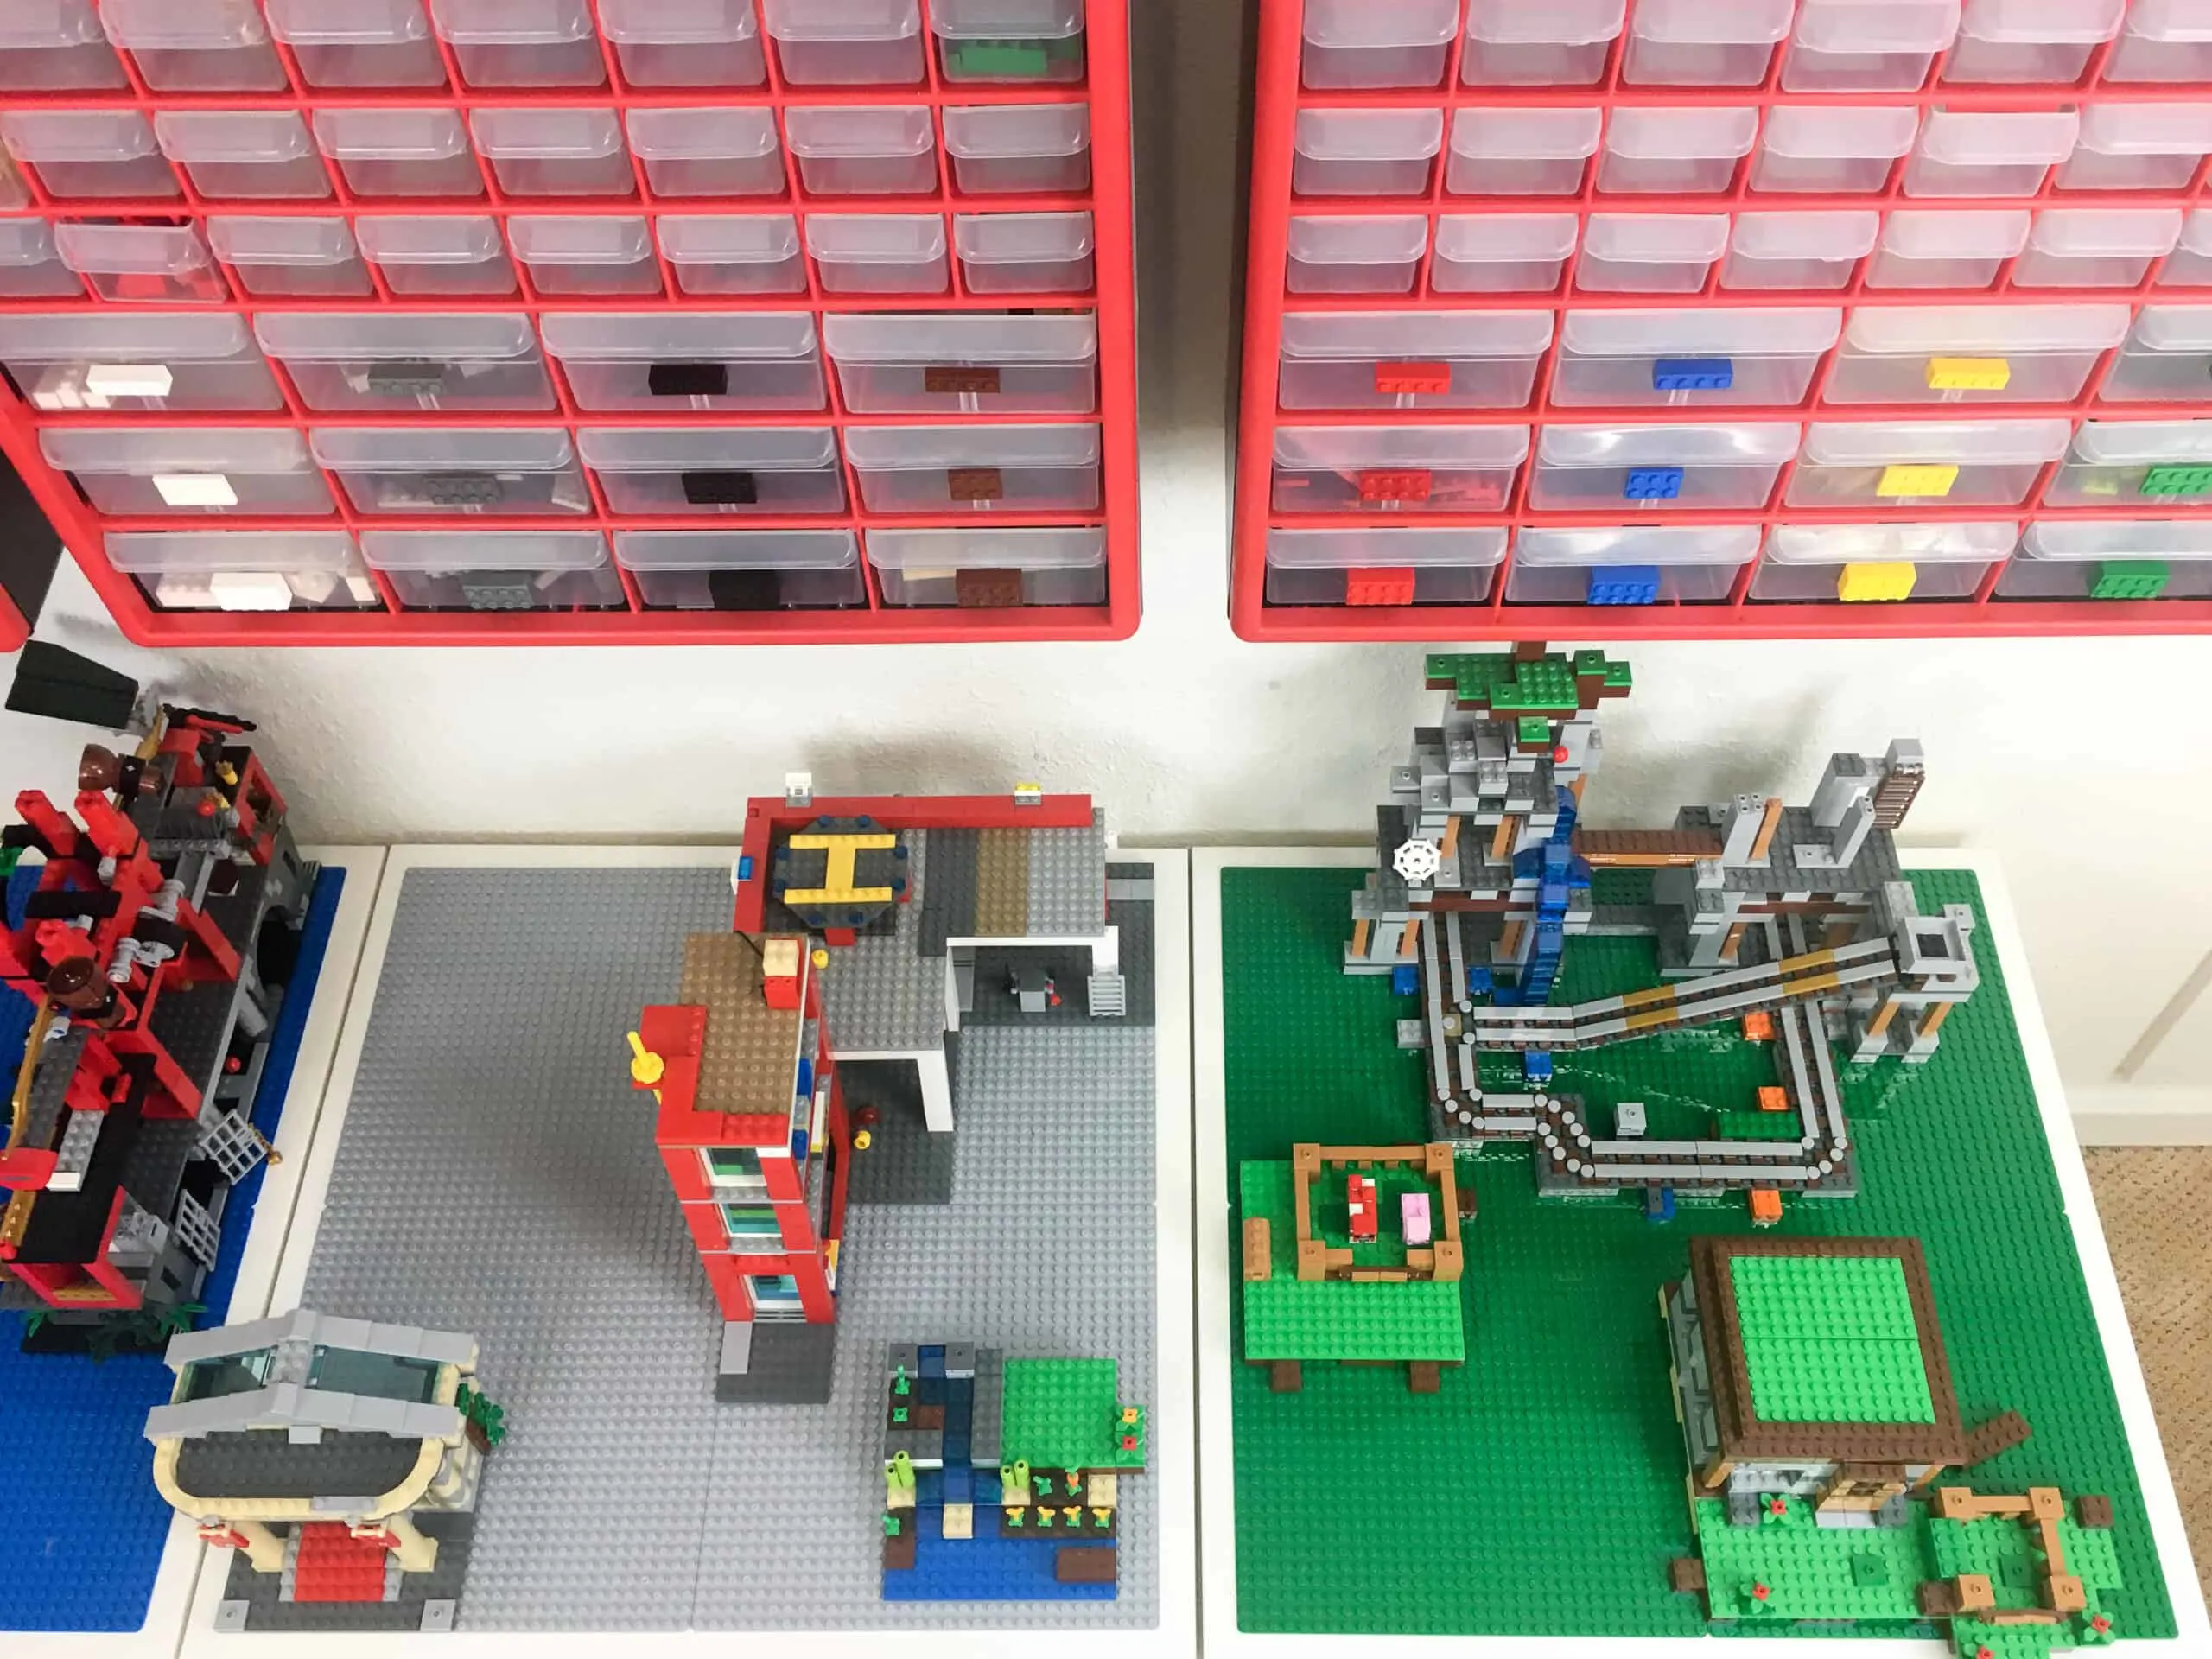 Lego city and Minecraft sets built on DIY Lego table